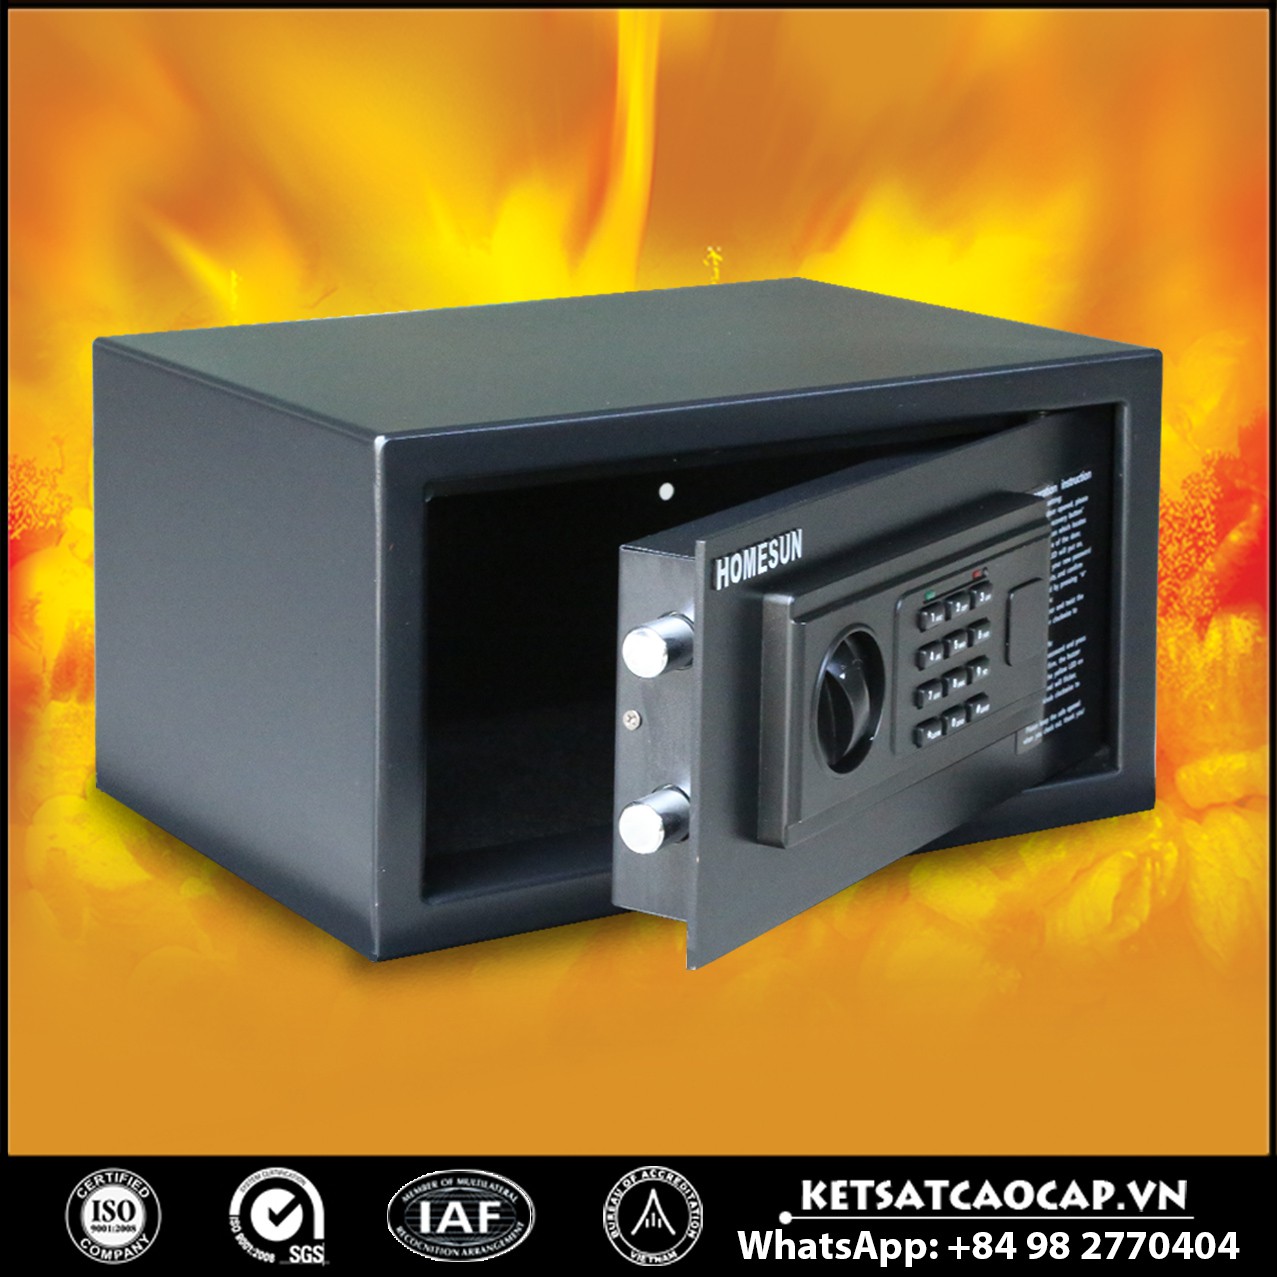 Best Hotel Safe For Home Suppliers and Exporters For Sale